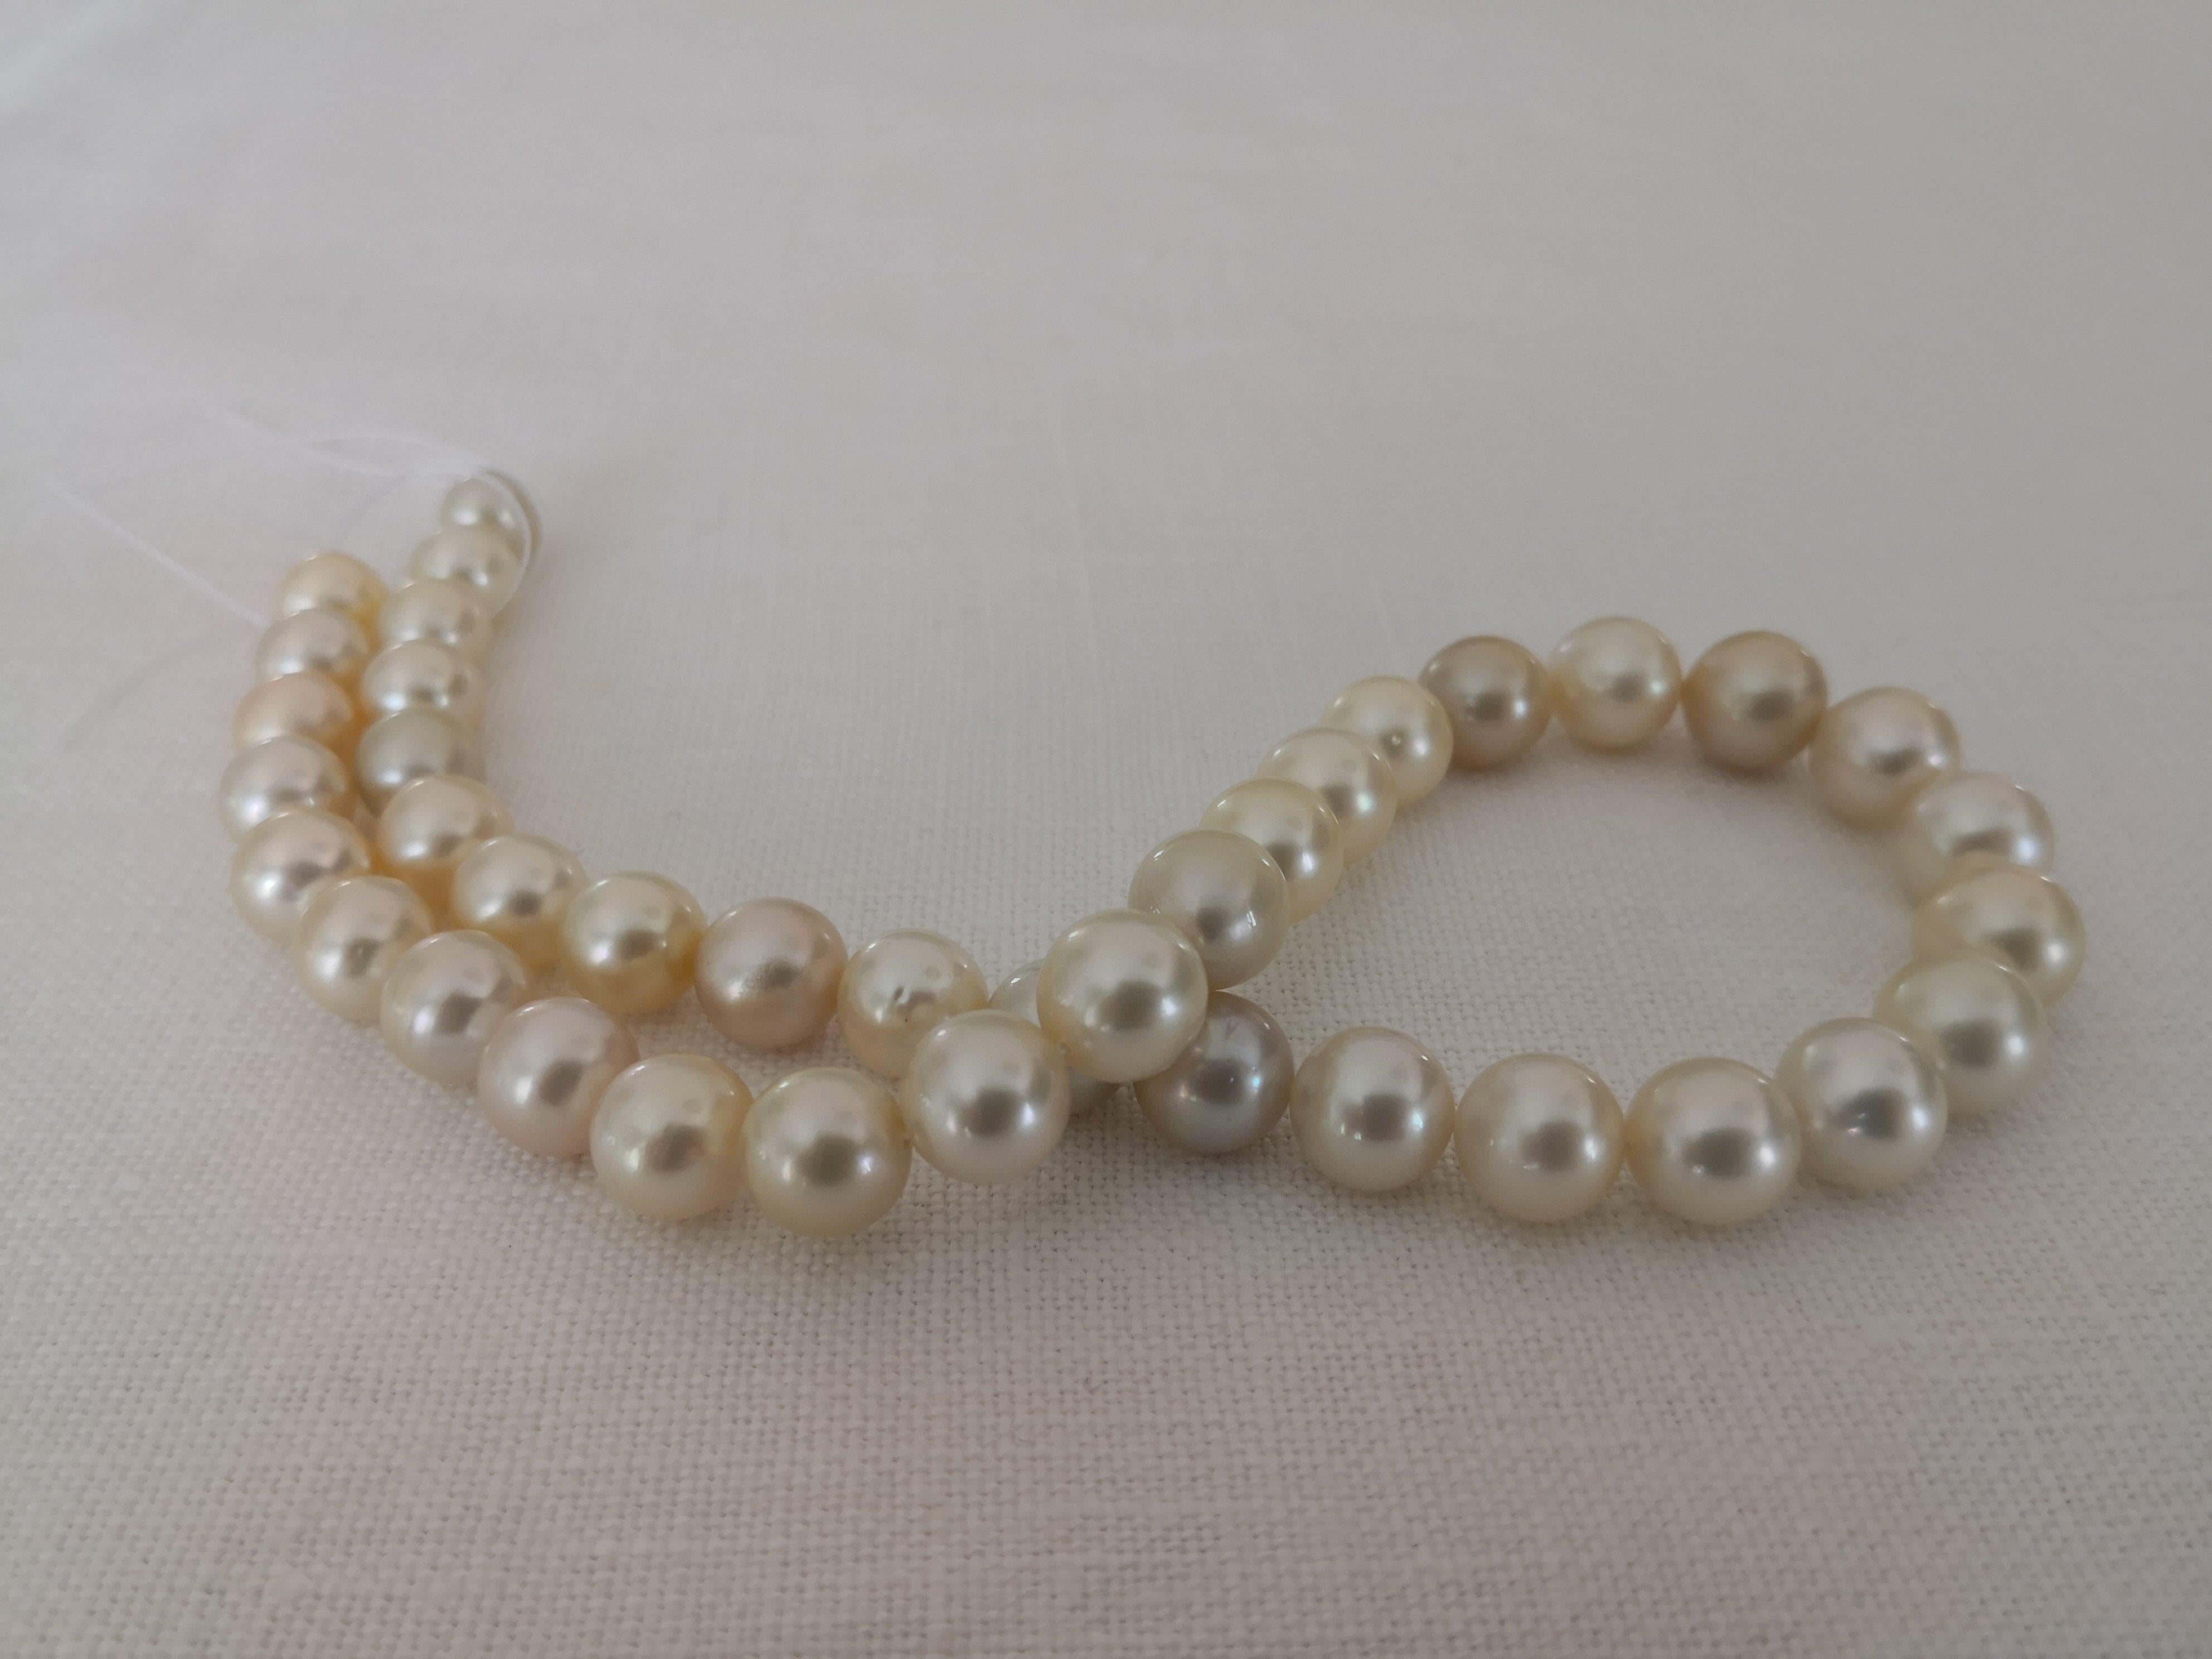 Beautiful Natural Color South Sea Pearls from Indonesia ocean waters.

- Size of Pearls 9-11 mm of diameter

- Pearls from Pinctada Maxima Oyster

- Origin: Indonesia ocean waters

- Natural Light Color and overtones

- High natural luster and